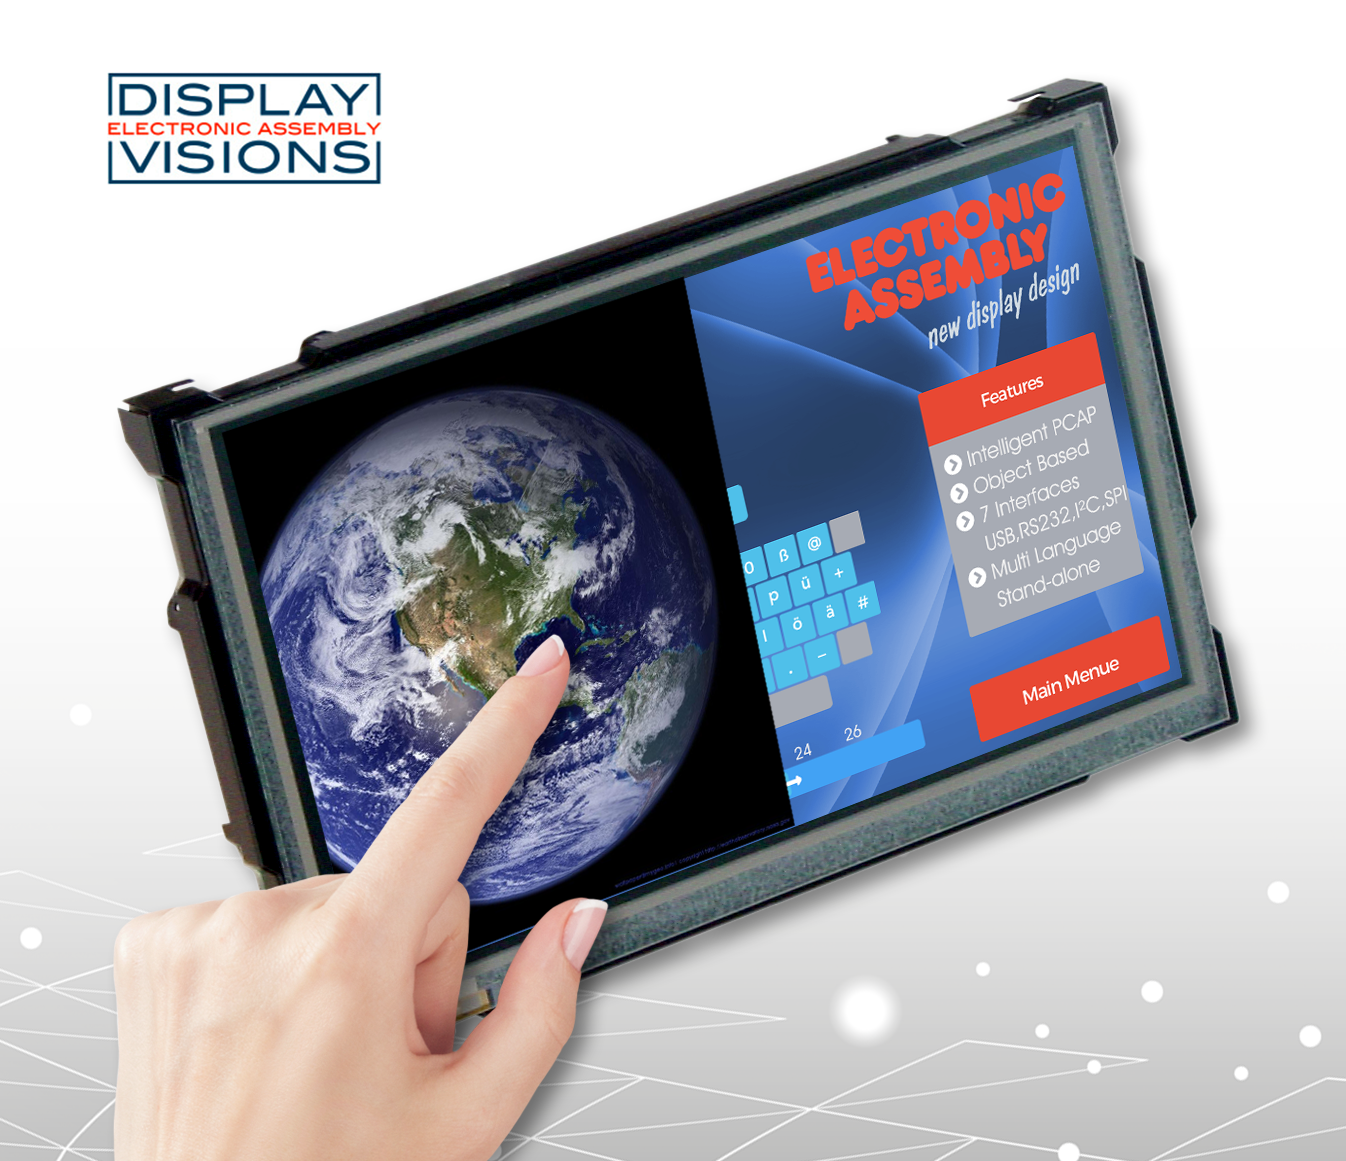 The easy way to Smart HMI: Touchpanel with Object Graphics for installation